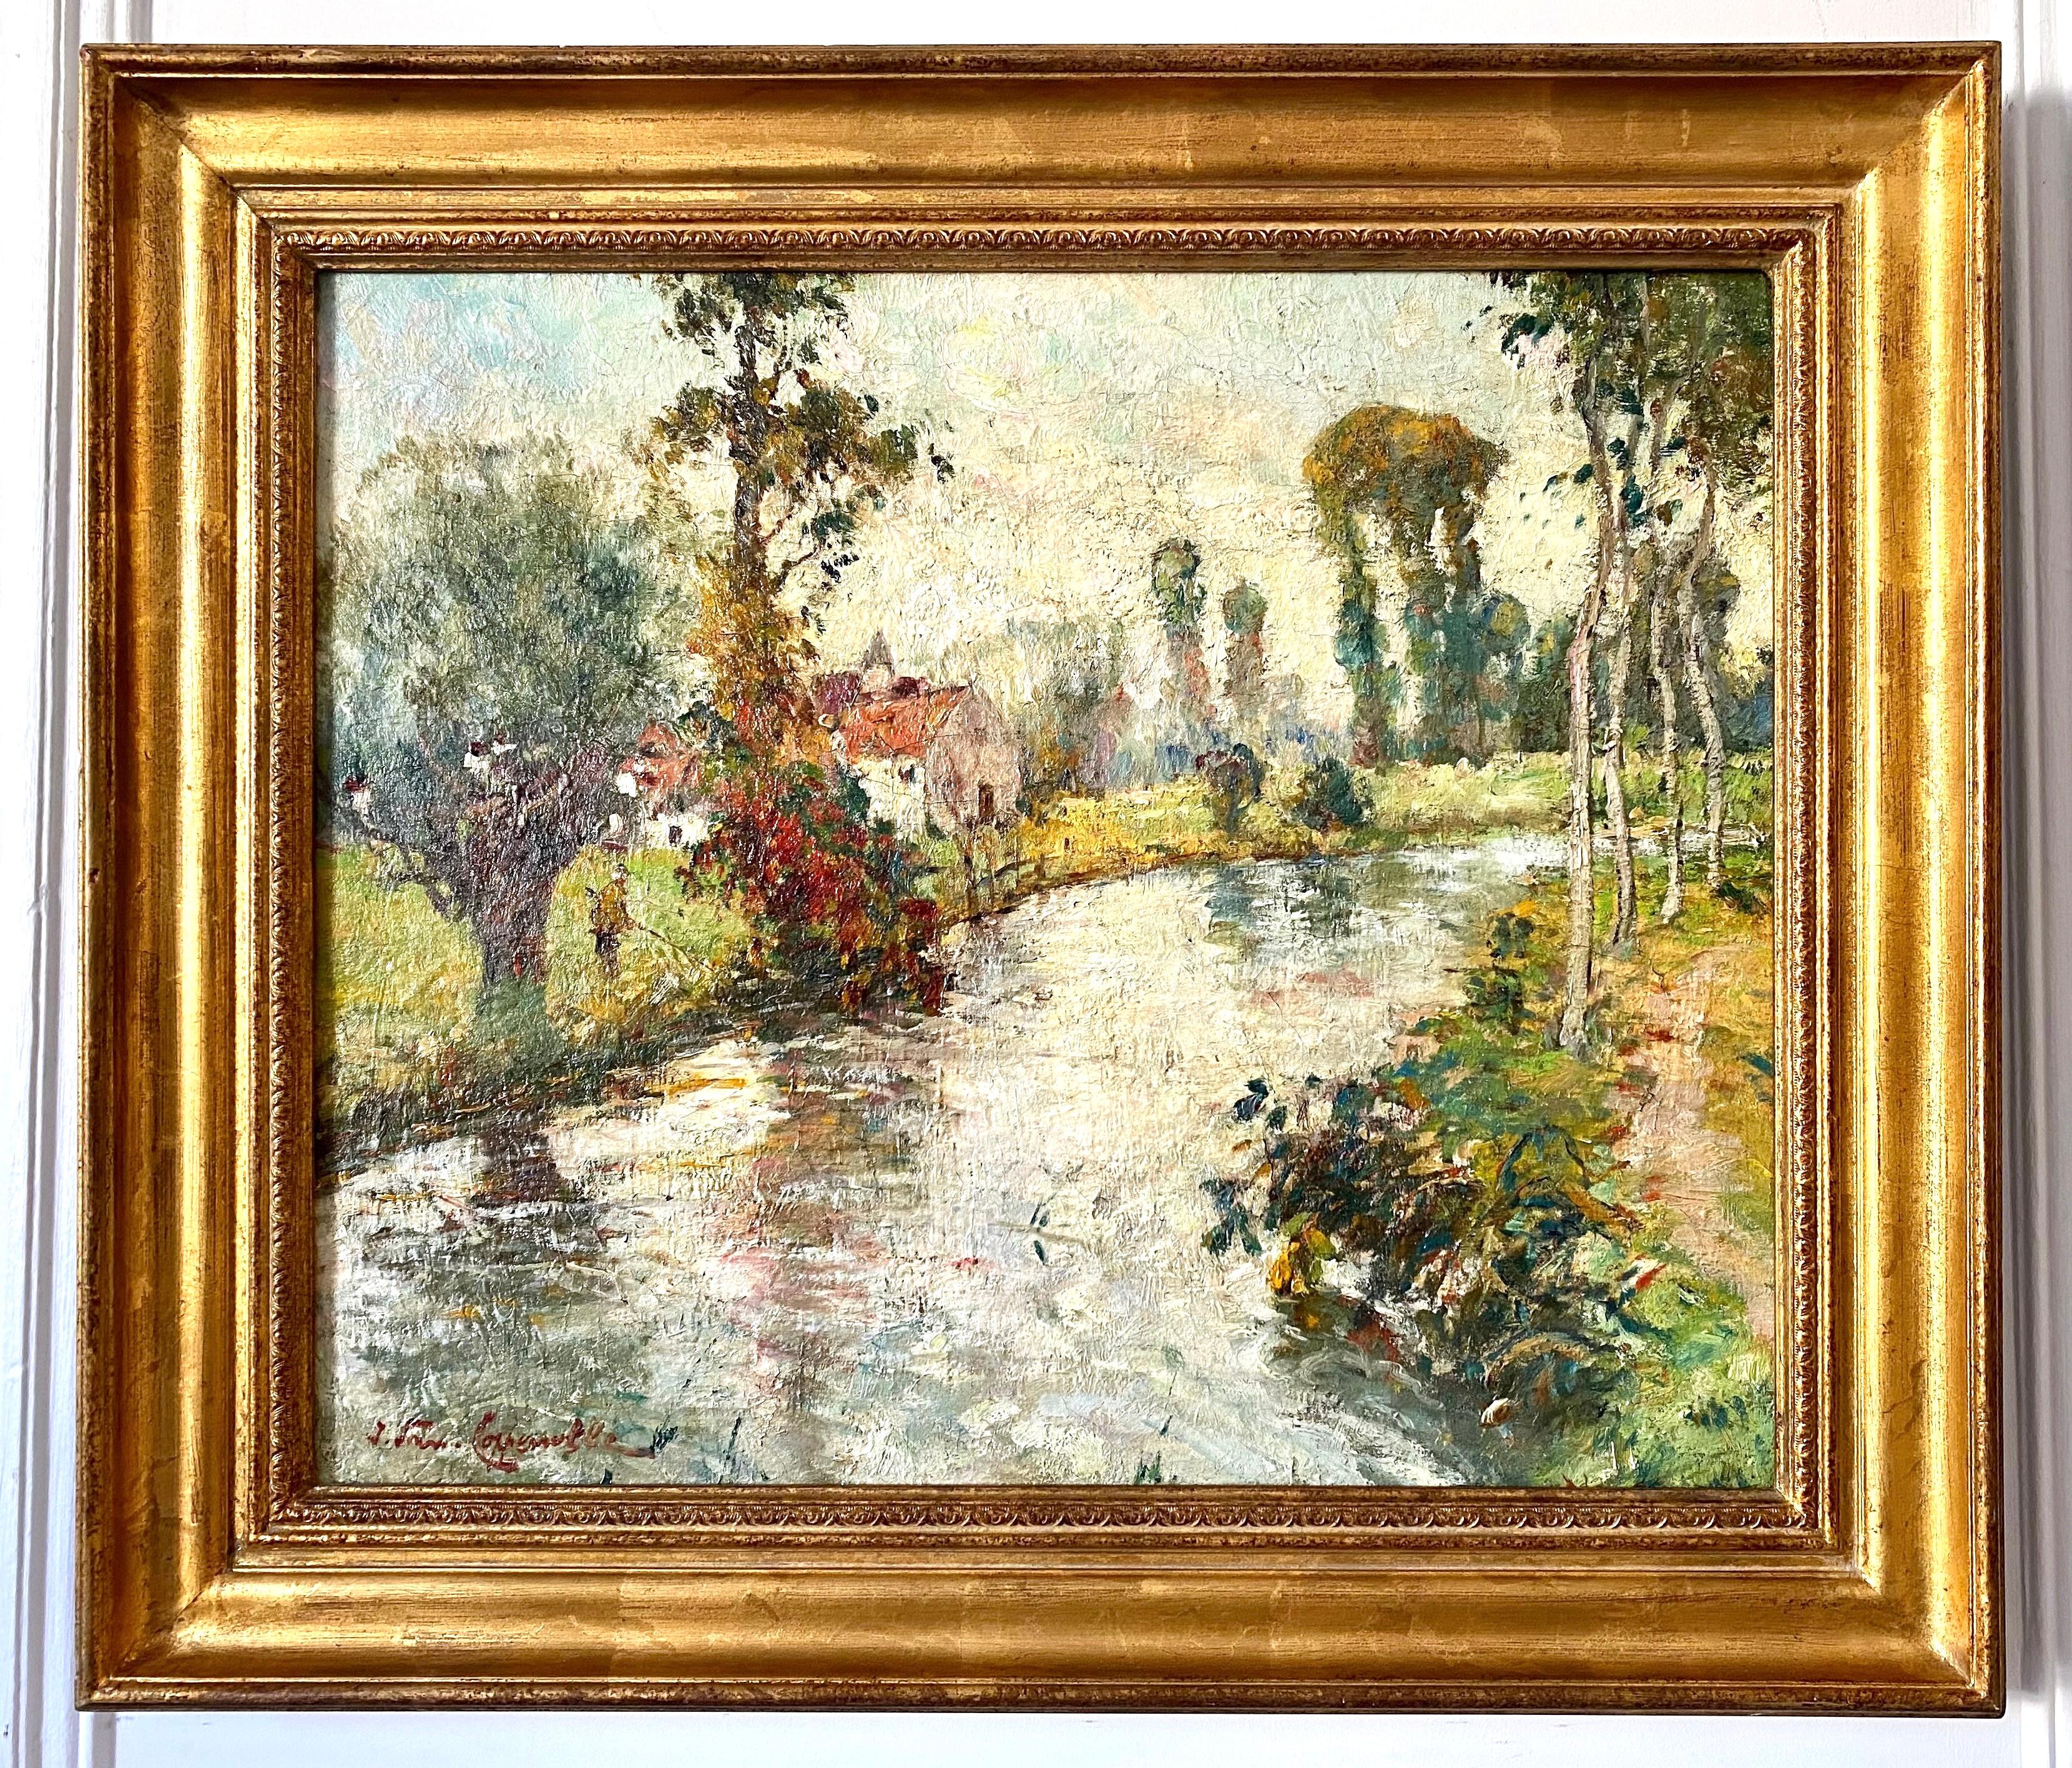 A wonderful view of the heartbreakingly beautiful Fontainebleau/Barbizon region, which was home to some of the greatest painters of the 19th and early 20th Century. The particular spot presented here is the river Loing at Montigny-sur-Loing, where